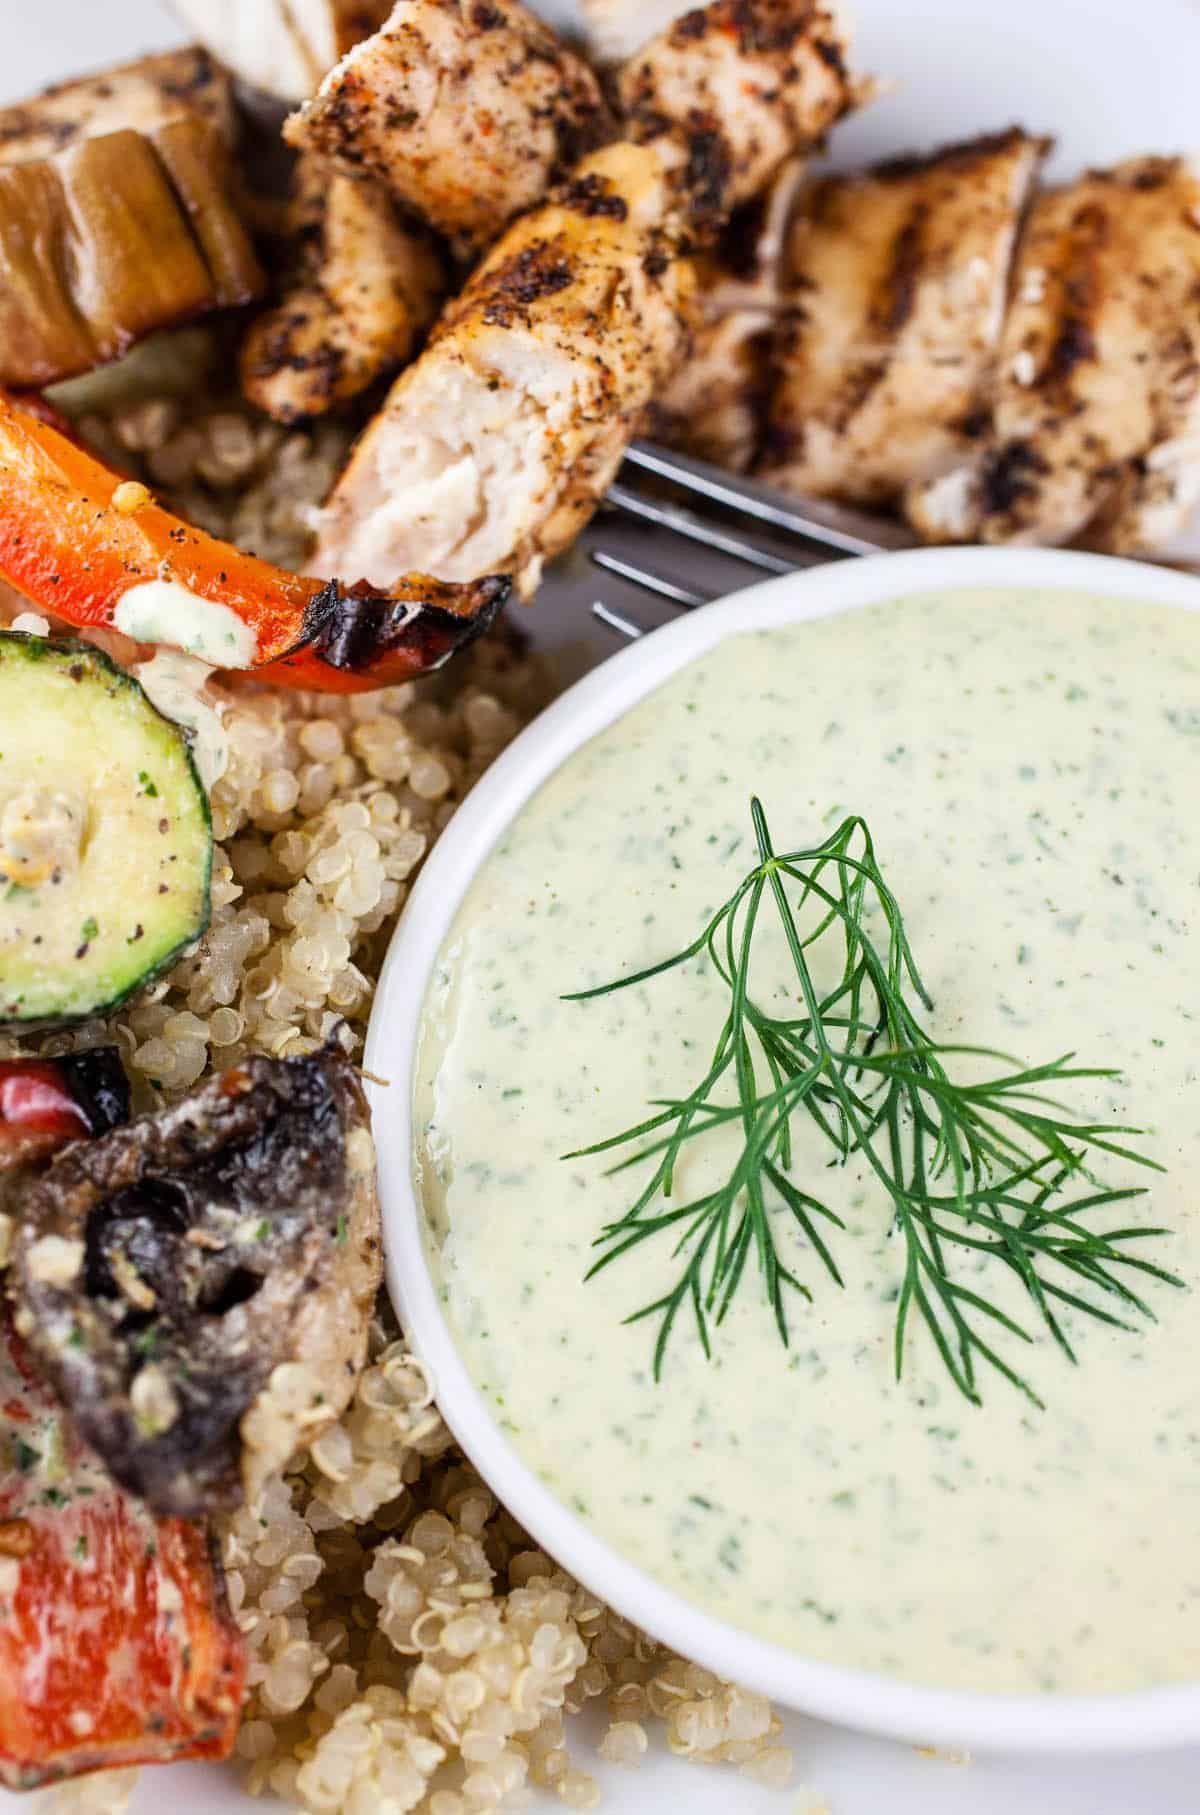 Lemon Herb tahini sauce in a bowl with grilled chicken skewers and roasted veggies alongside it. 